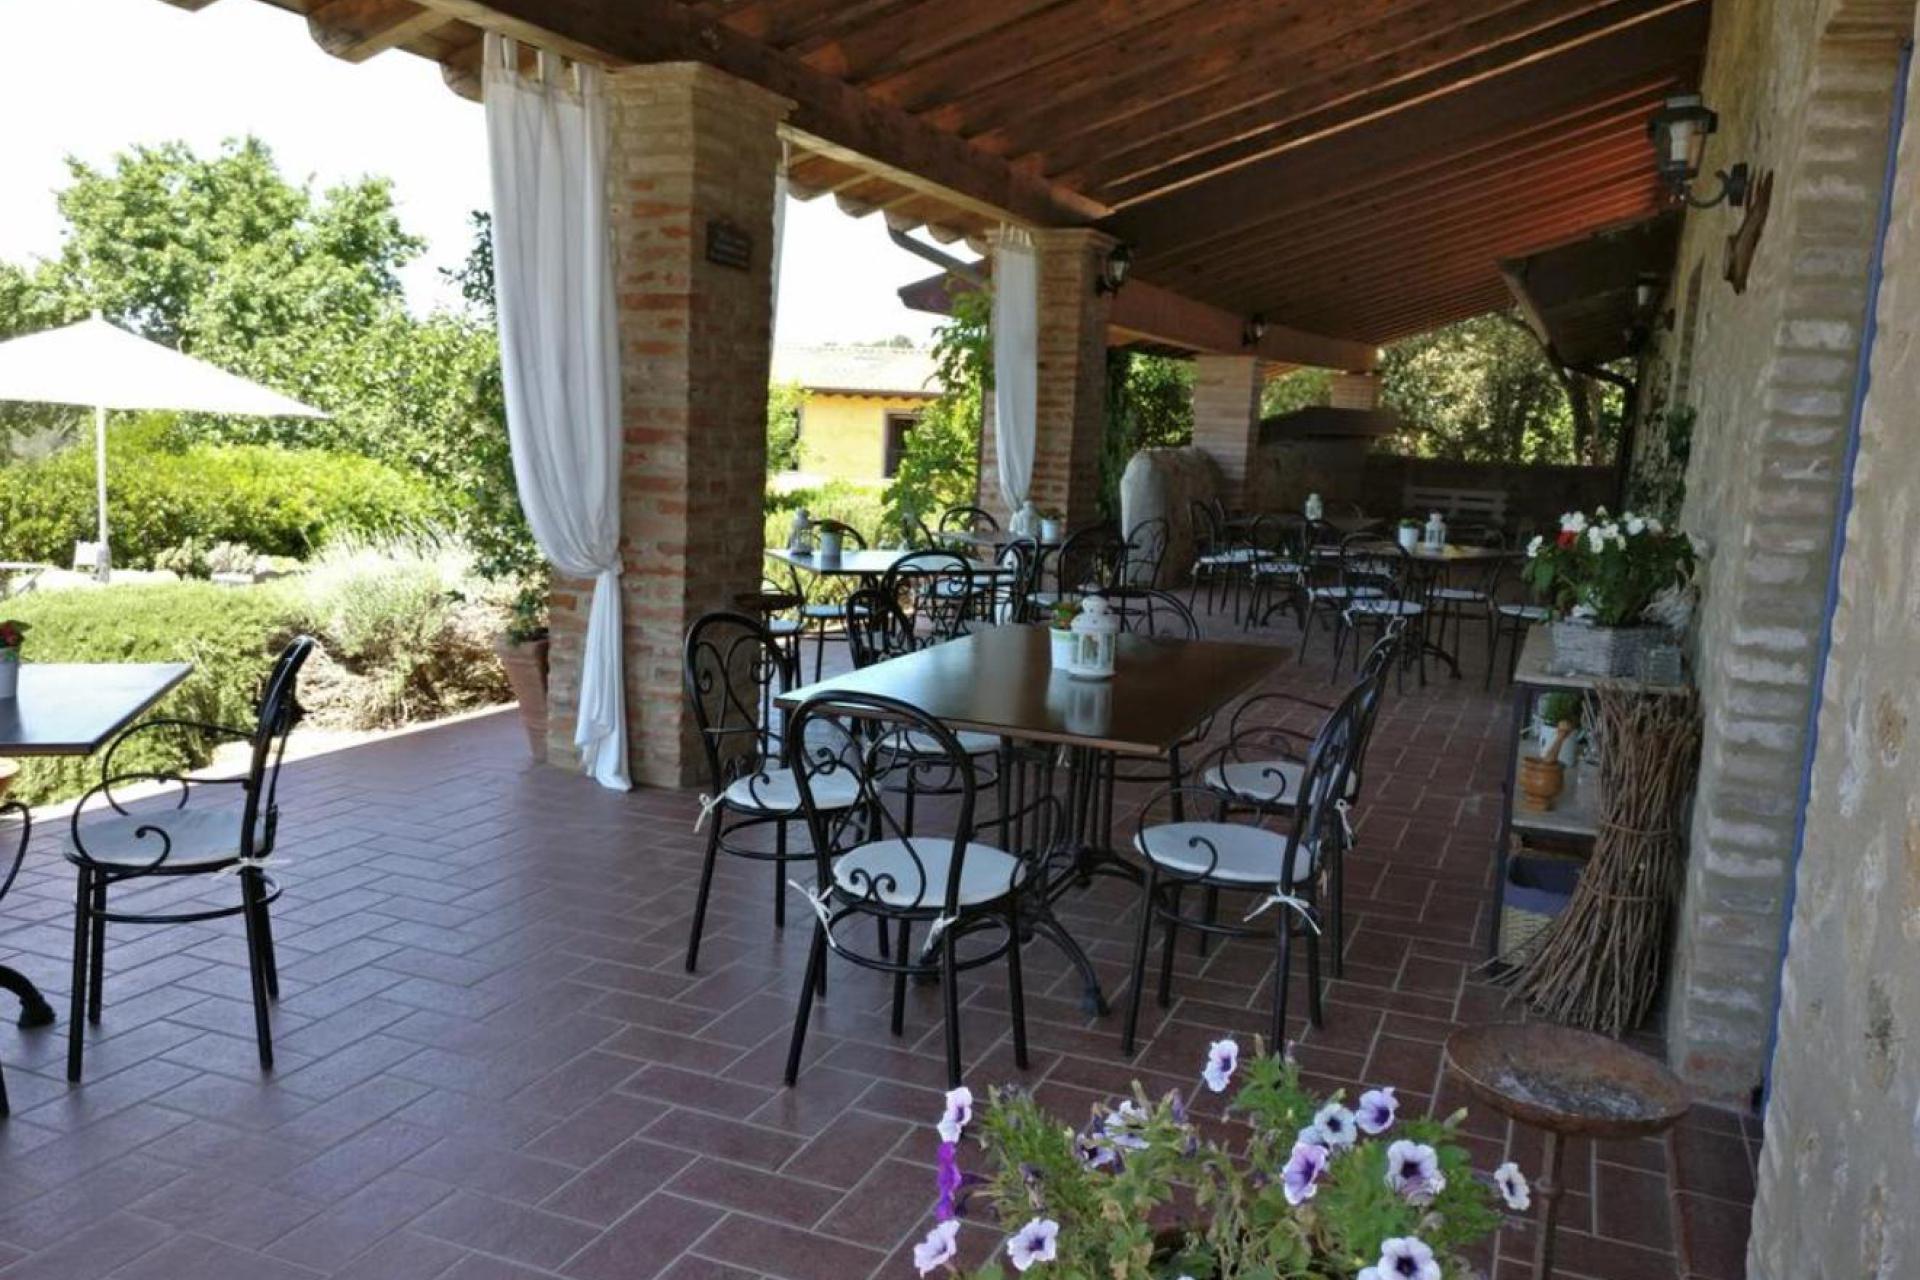 B&B with breakfast and dinner in the south of Siena